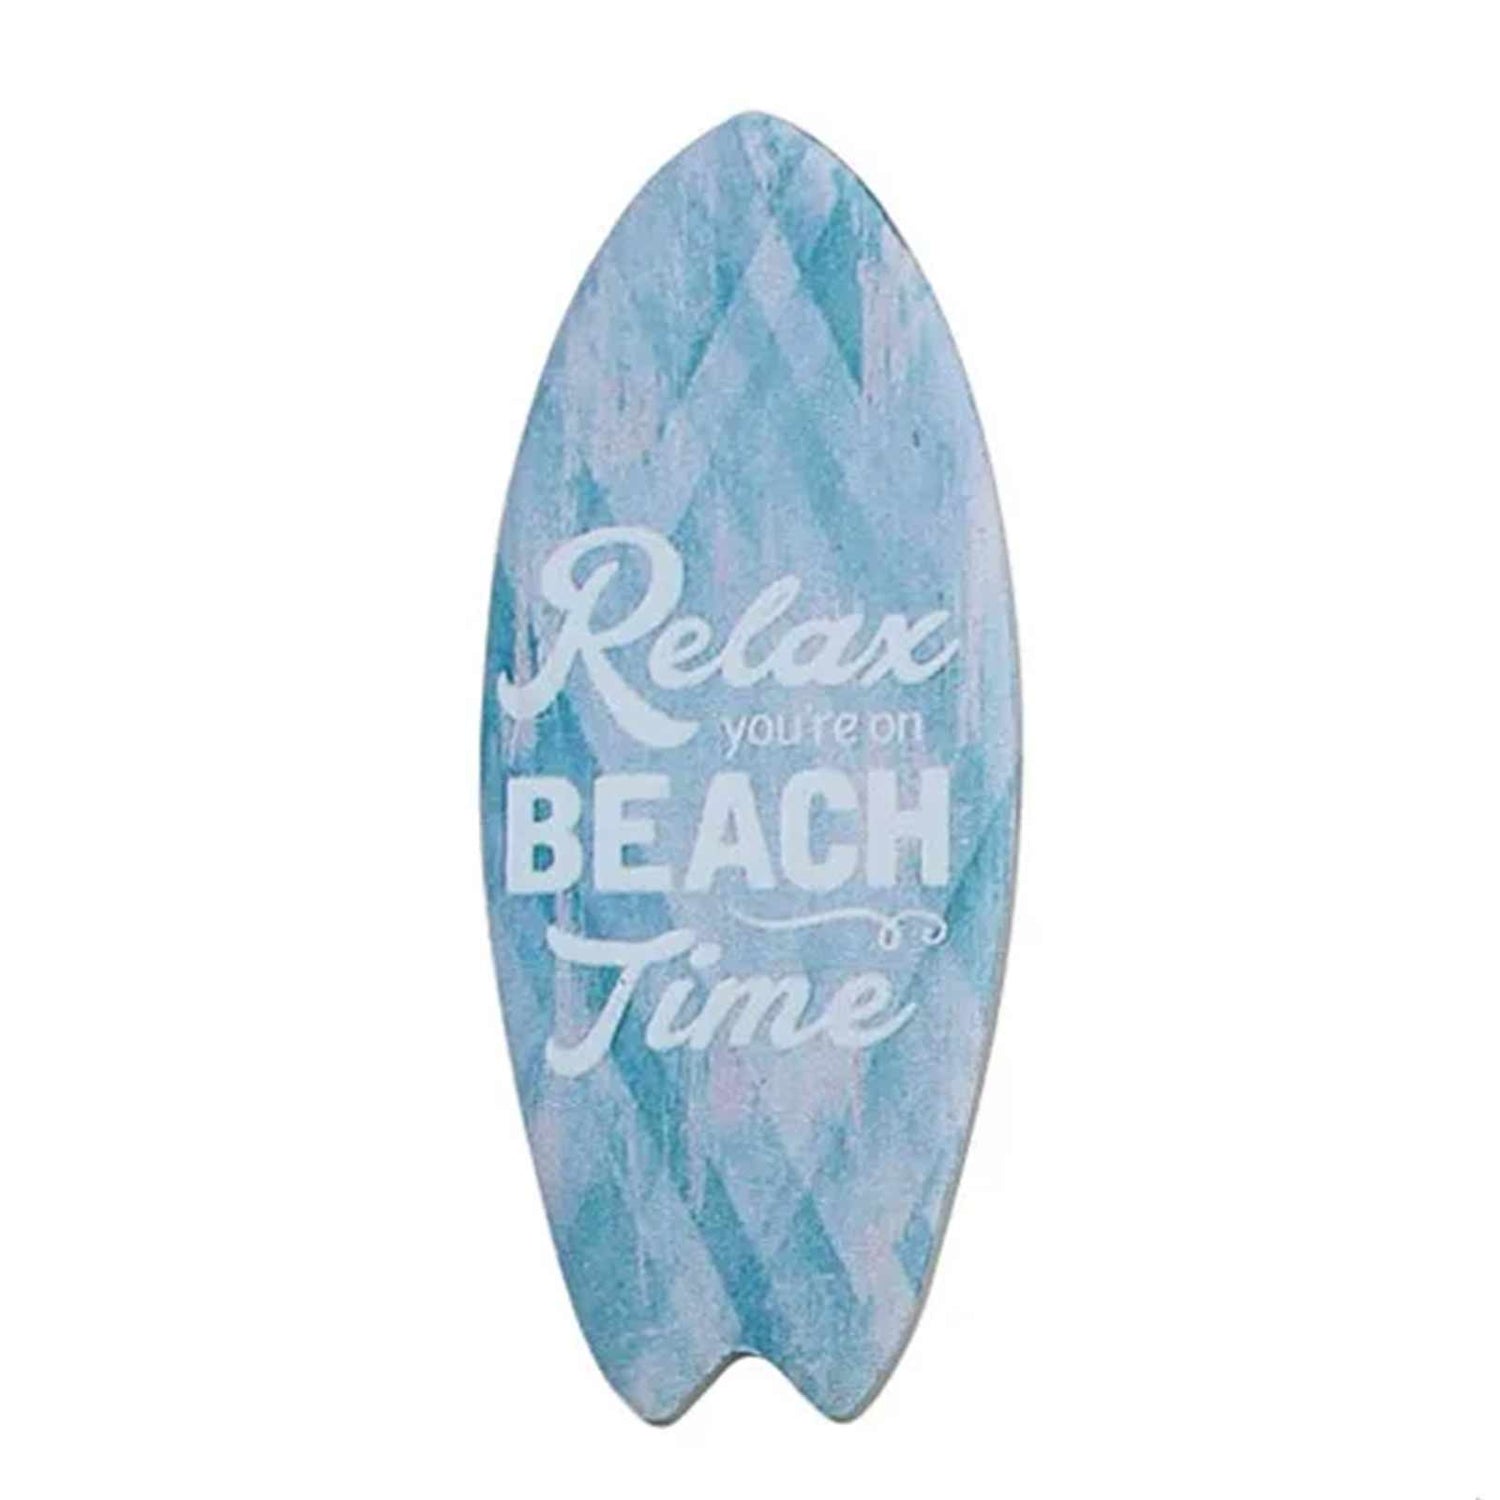 Beach Surf Magnet - Relax You&